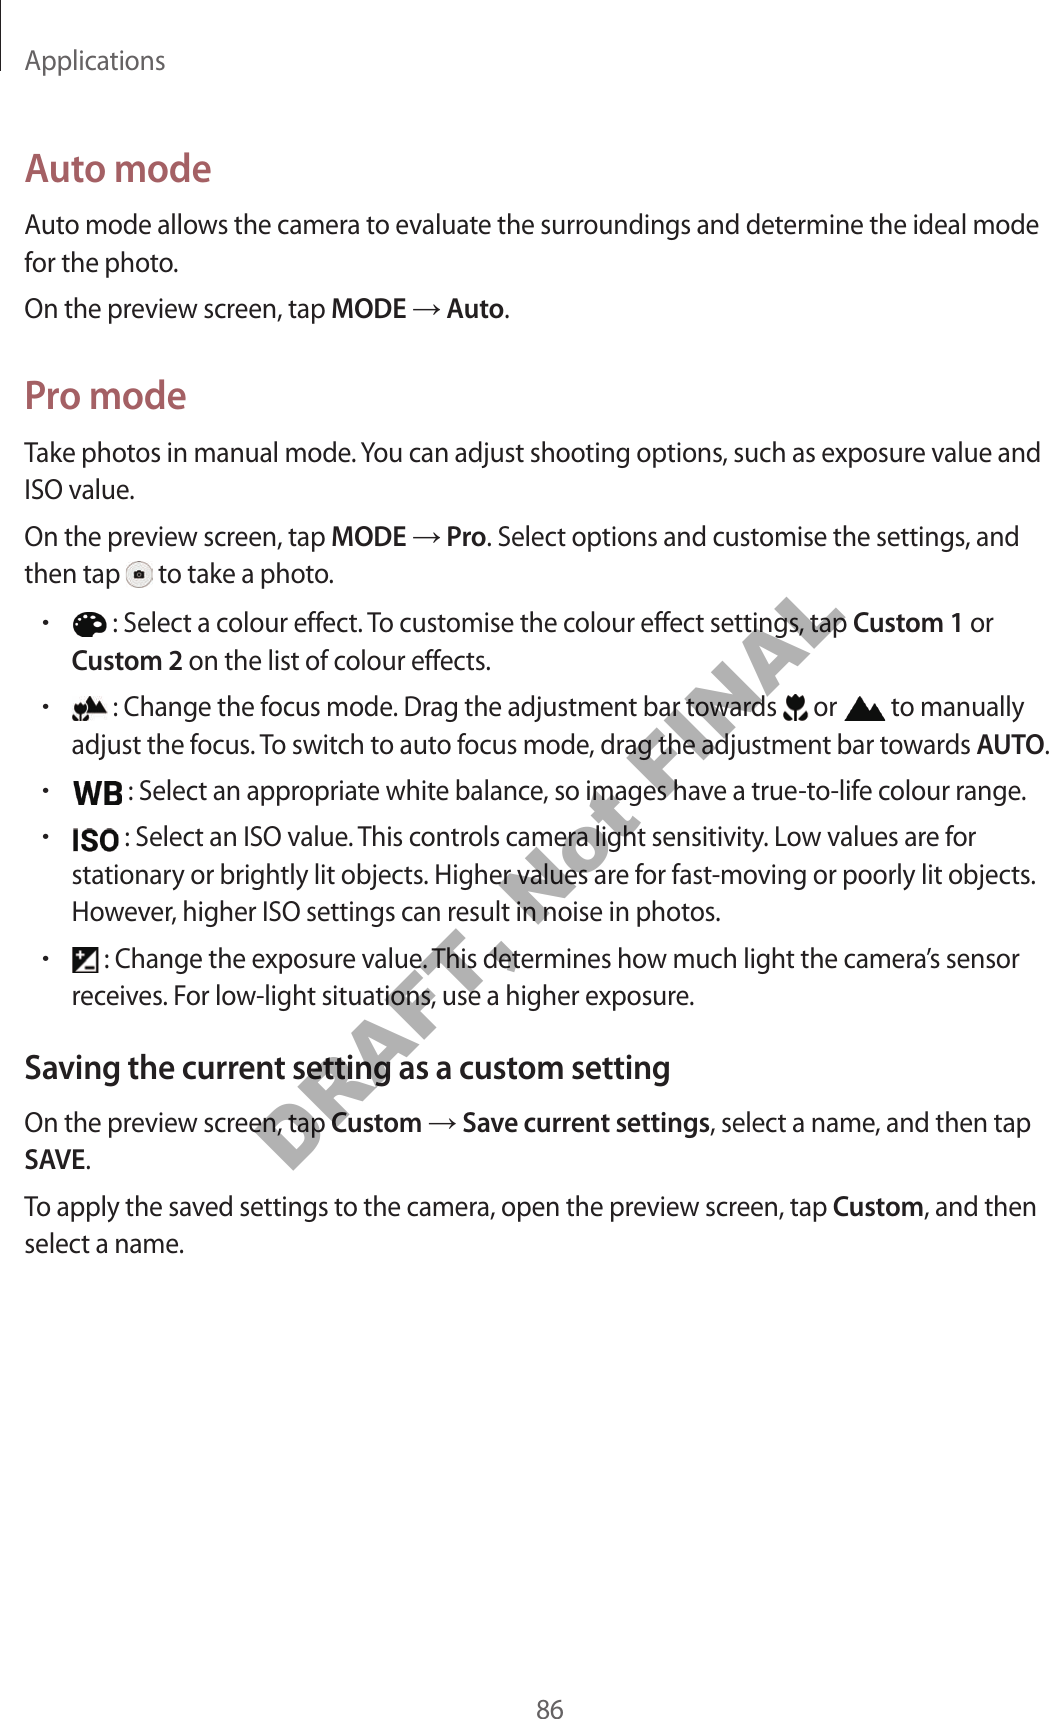 Applications86A uto modeAut o mode allow s the camera t o evalua te the surr oundings and det ermine the ideal mode for the phot o.On the preview scr een, tap MODE  Auto.Pr o modeTake photos in manual mode. You can adjust shooting options, such as exposure v alue and ISO value.On the preview scr een, tap MODE  Pro. Select options and customise the settings , and then tap   to take a photo .• : Select a colour eff ect. To customise the colour effect settings, tap Cust om 1 or Cust om 2 on the list of colour eff ects.• : Change the focus mode . Dr ag the adjustment bar t ow ar ds   or   to manually adjust the focus . To switch to auto focus mode , dr ag the adjustment bar t o war ds AUTO.• : Select an appropriat e white balanc e , so images ha v e a true-to-life c olour range .• : Select an ISO value . T his con tr ols camera ligh t sensitivity. Lo w values ar e for stationary or brightly lit objects. Higher values are f or fast-mo ving or poorly lit objects. Howev er, higher ISO settings can result in noise in photos .• : Change the exposure value. This determines how much light the camera’s sensor receiv es . For low -light situa tions , use a higher exposur e .Saving the curren t setting as a custom settingOn the preview scr een, tap Custom  Save curr en t settings, select a name, and then tap SAVE.To apply the sav ed settings to the camer a, open the pr eview scr een, tap Custom, and then select a name.DRAFT, Not FINAL